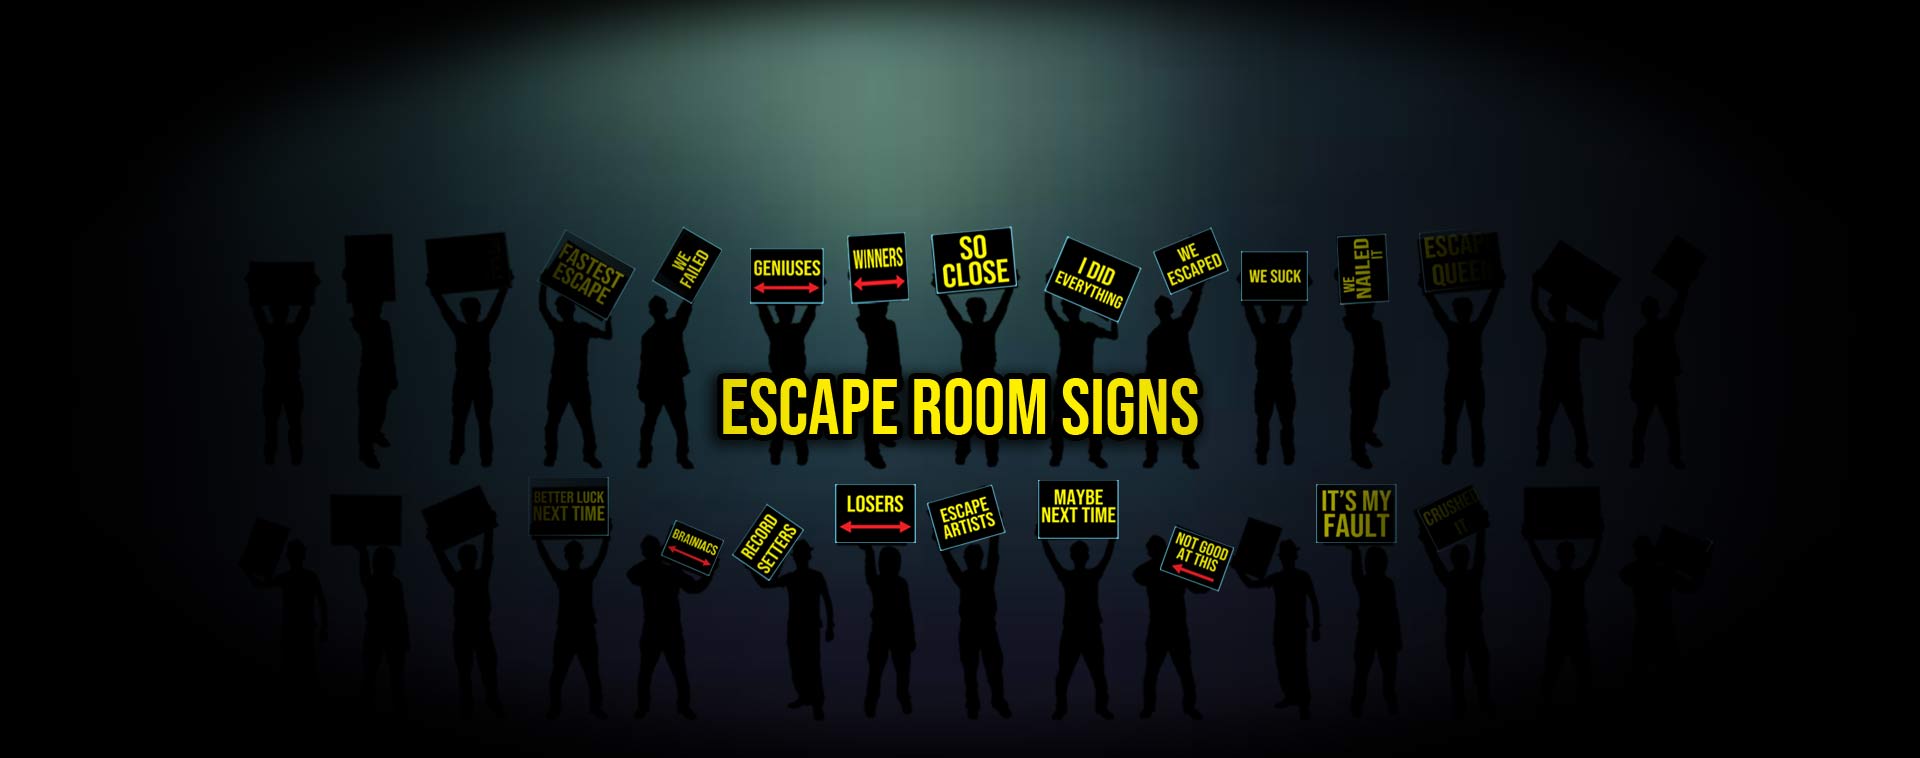 escape-room-spy-welcome-poster-signs-finger-pointing-directional